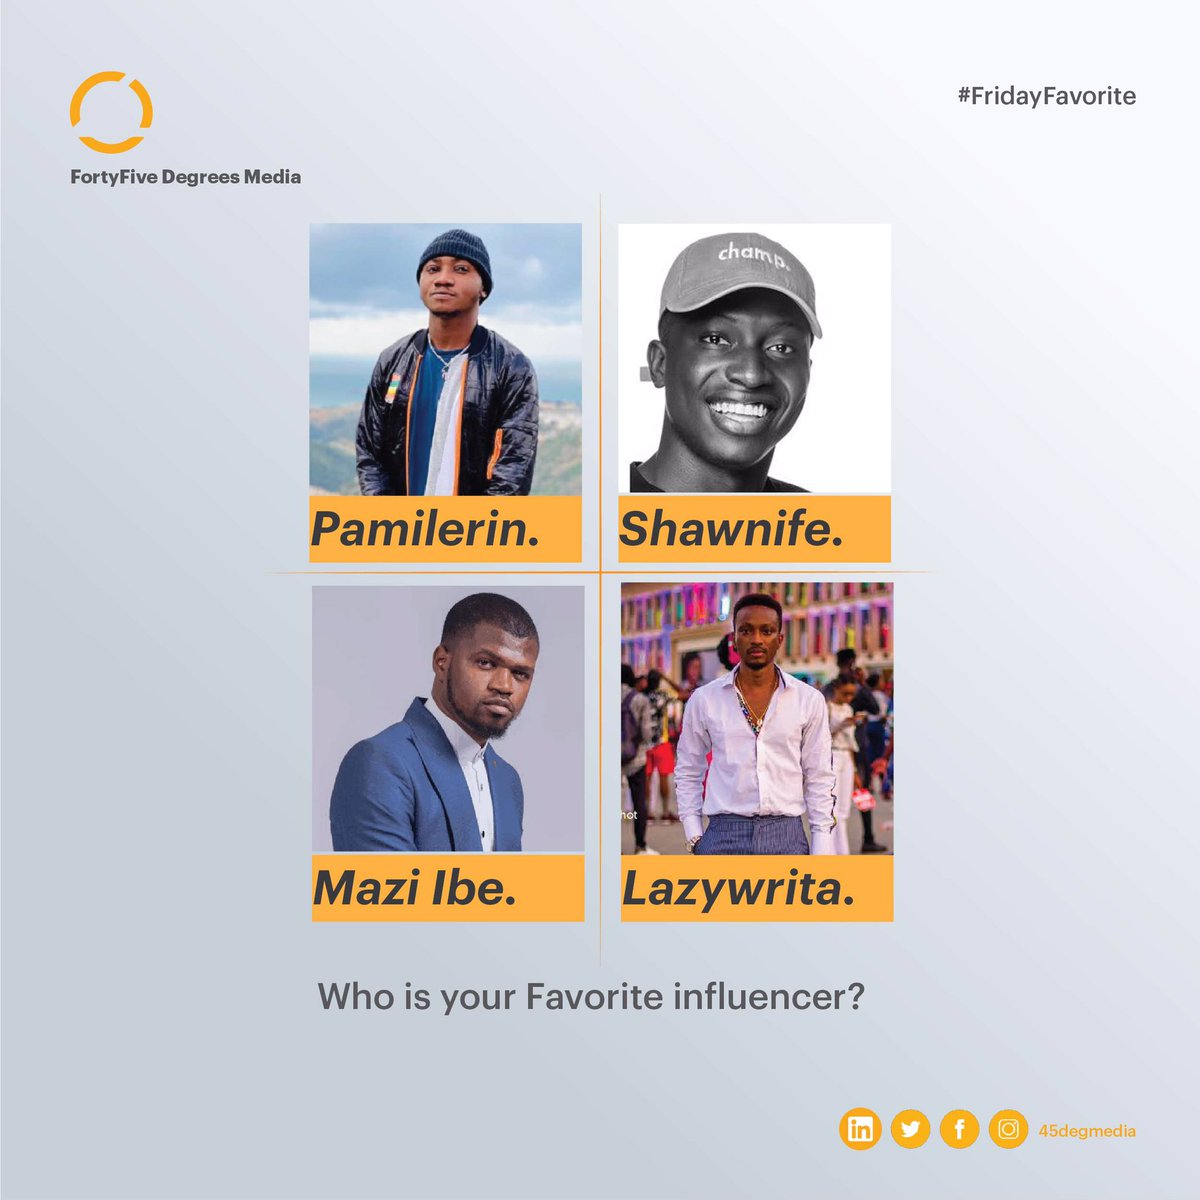 Who's your favorite Social influencer for this list?

Pamilerin
Shawnife
Mazi Ibe
Lazywrita

RT & Drop a comment.

#FridayVibes #ffdm #FridayFavorite